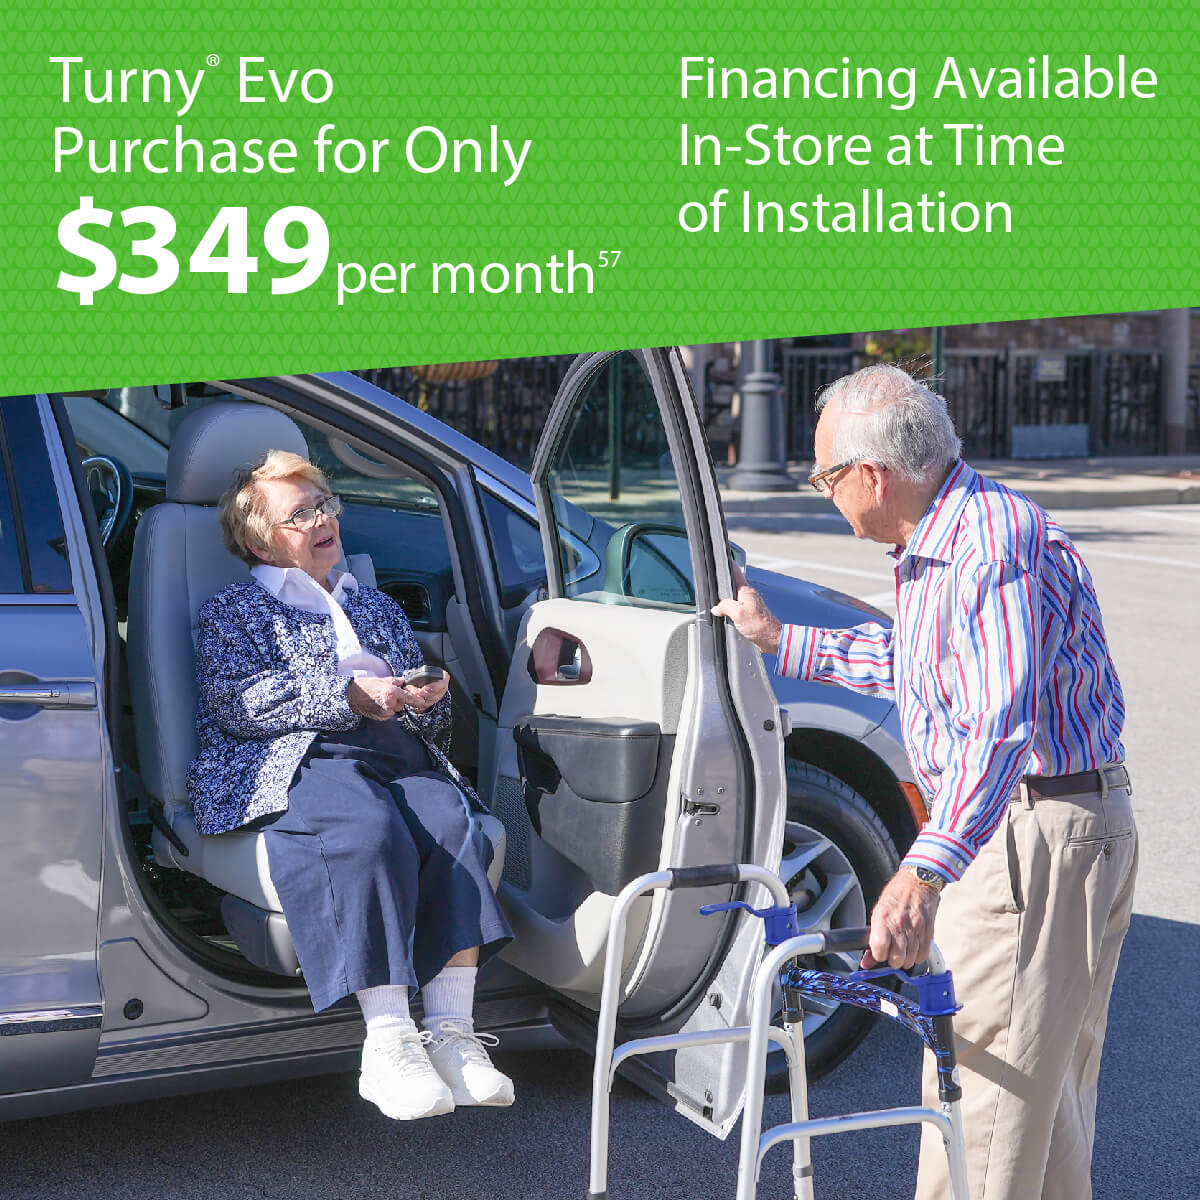 Turny Evo with Financing Available